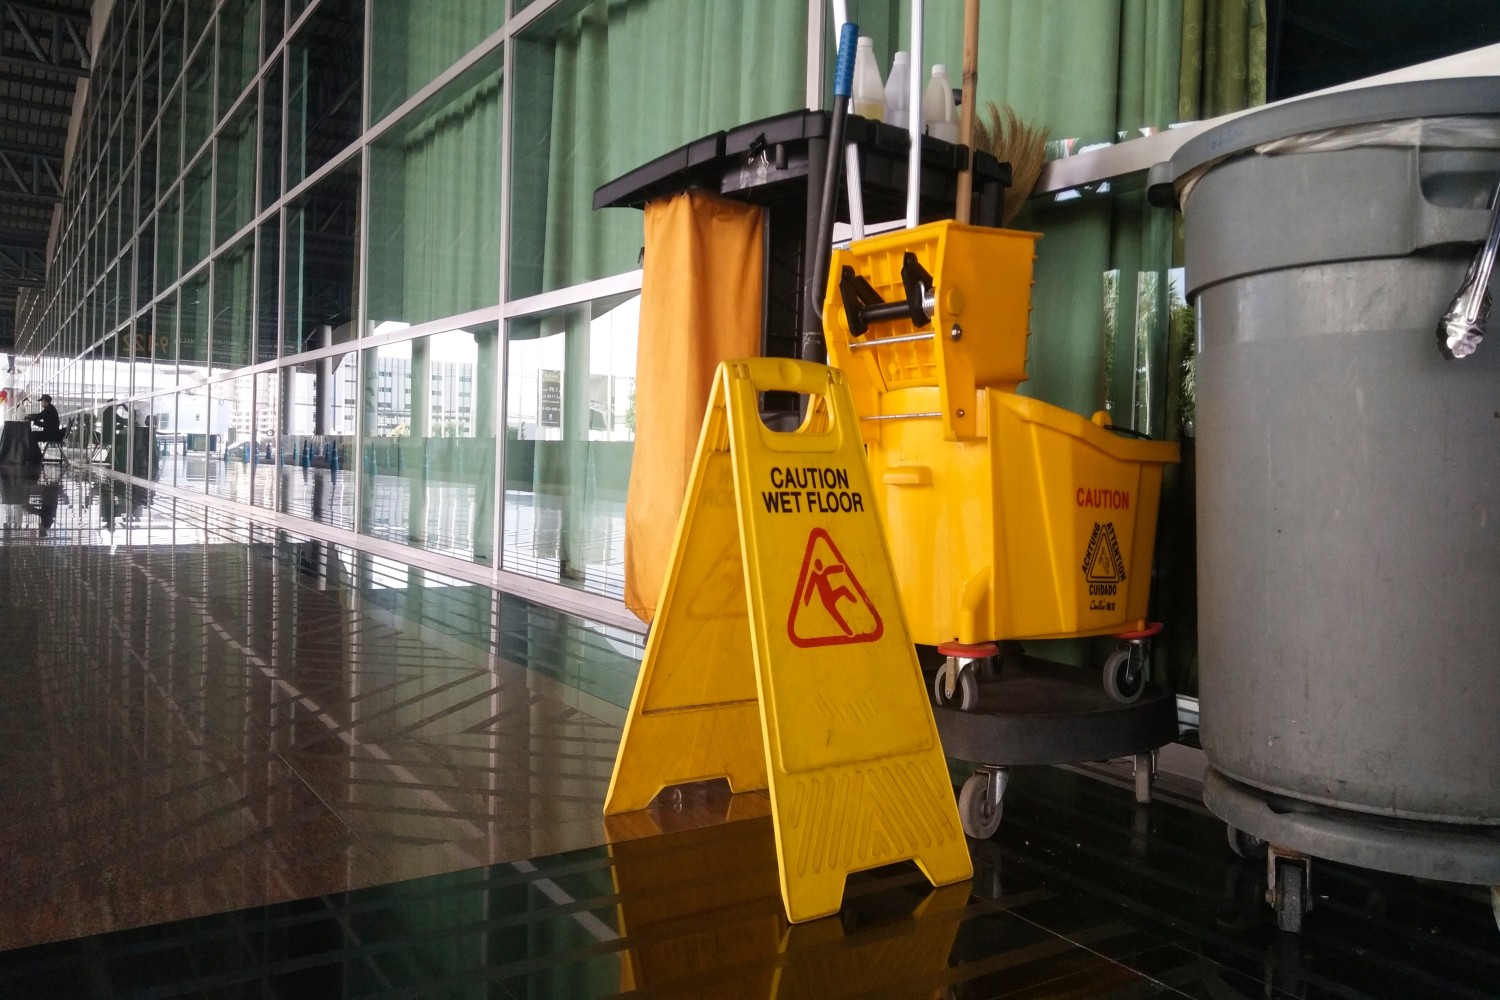 the warning signs cleaning and caution wet floor in the building and janitorial service car